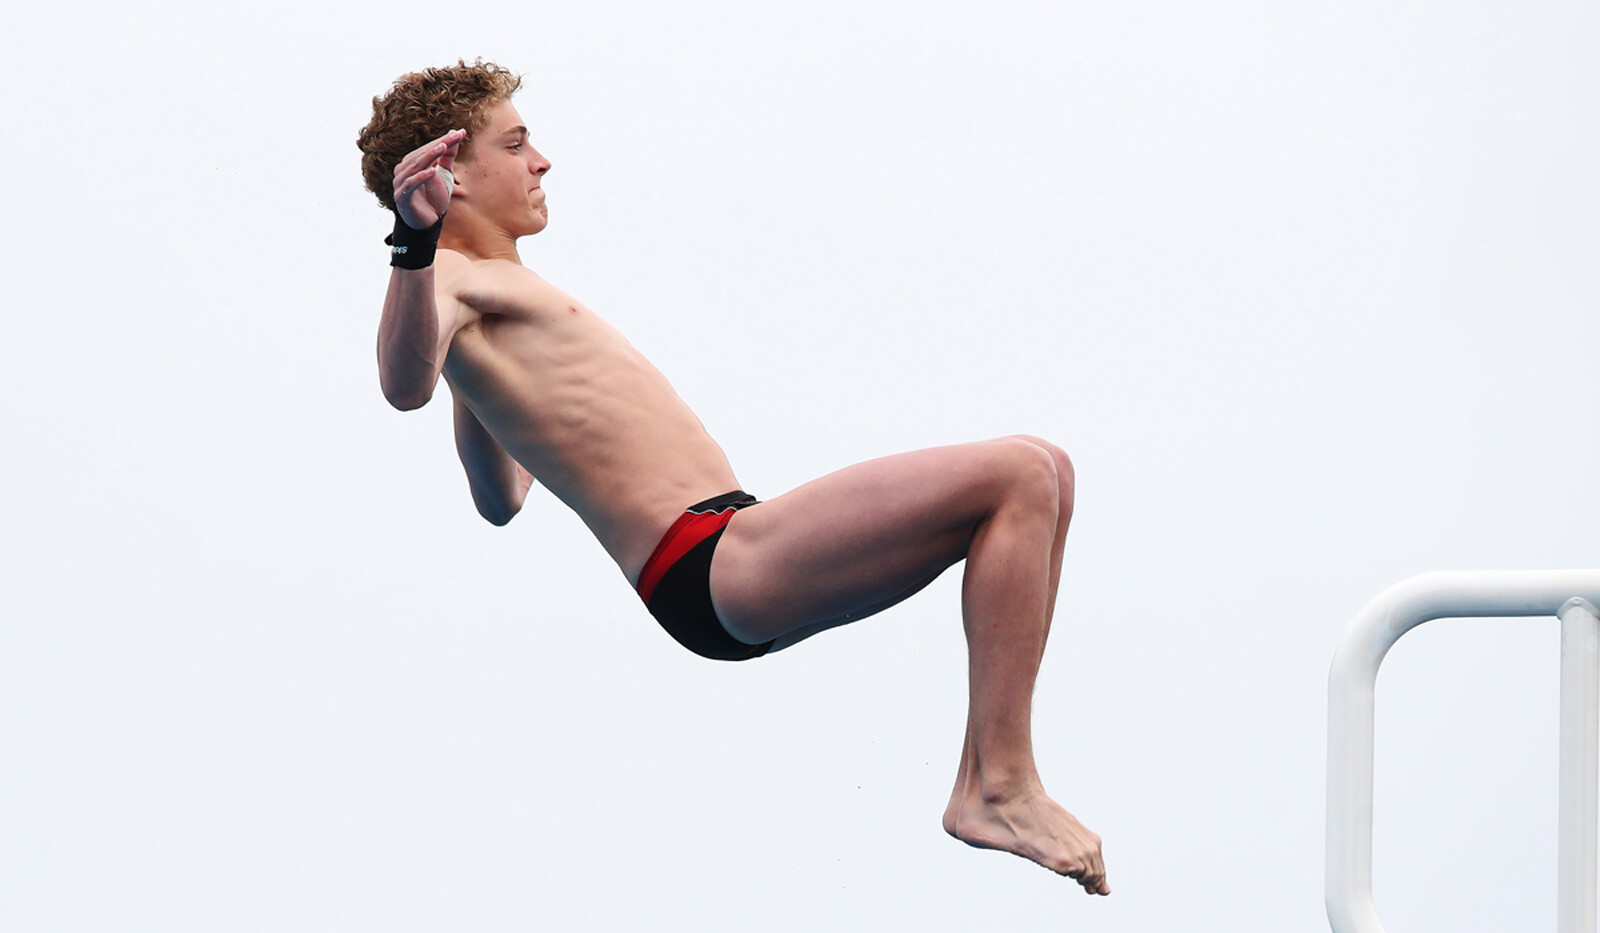 Canadian divers end world juniors with two fourth place finishes